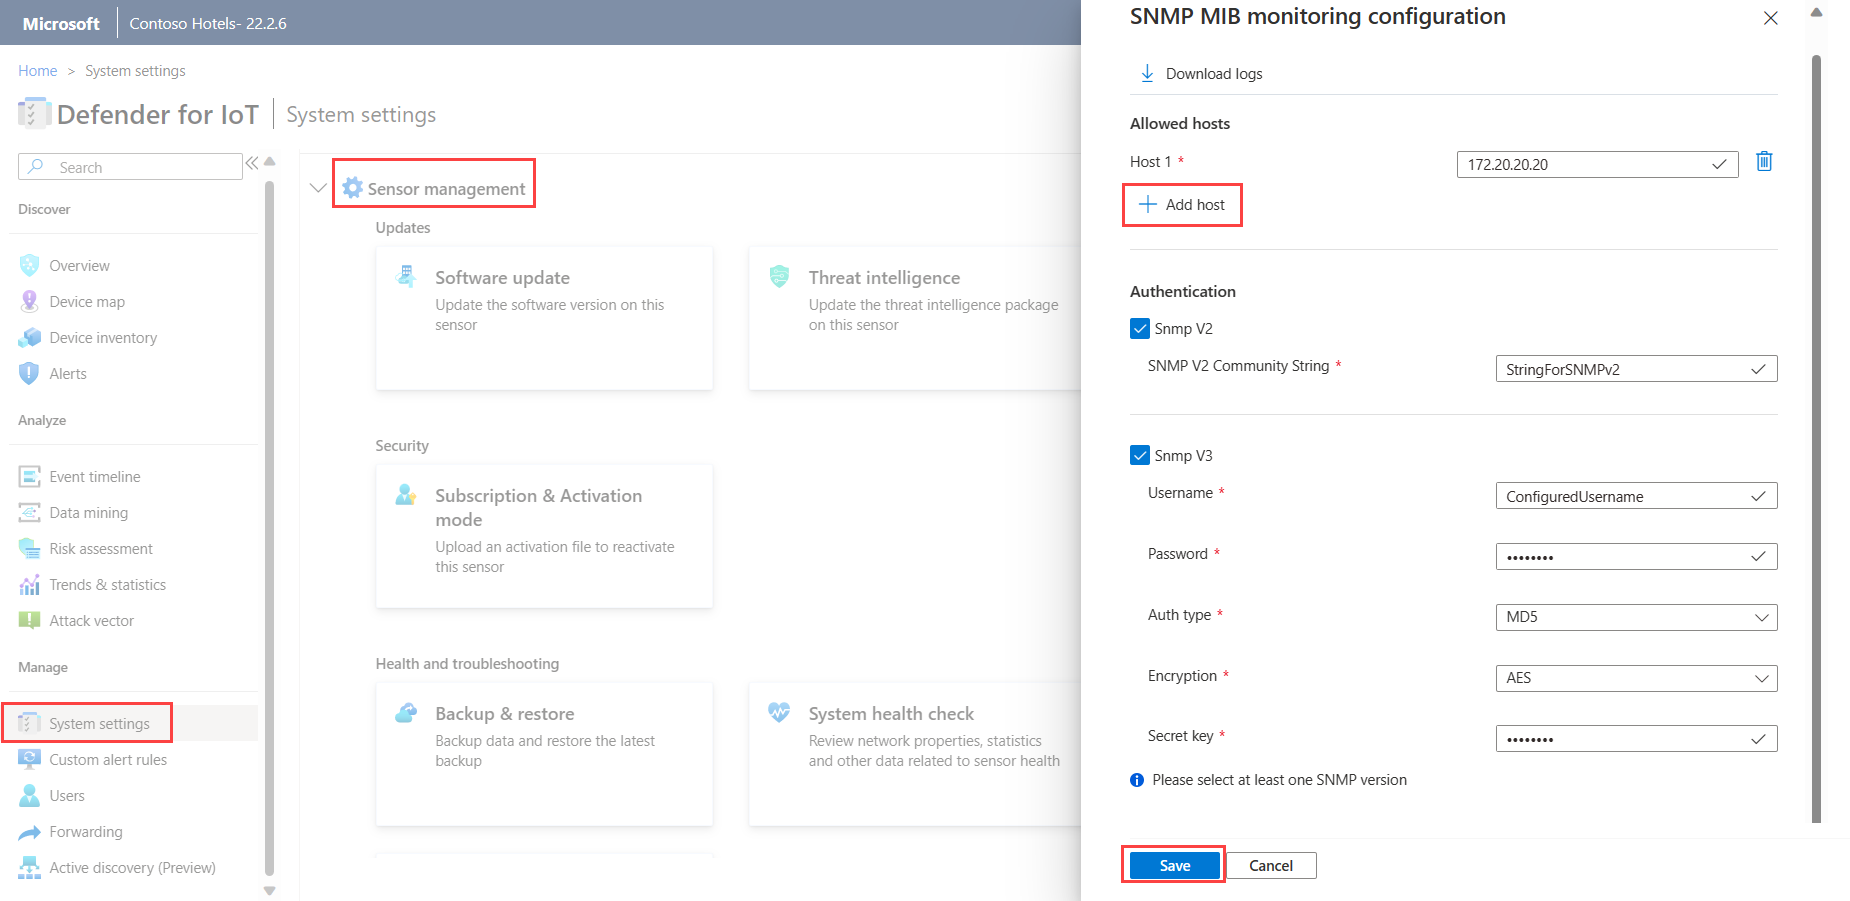 Screenshot of the SNMP MIB monitoring configuration page.